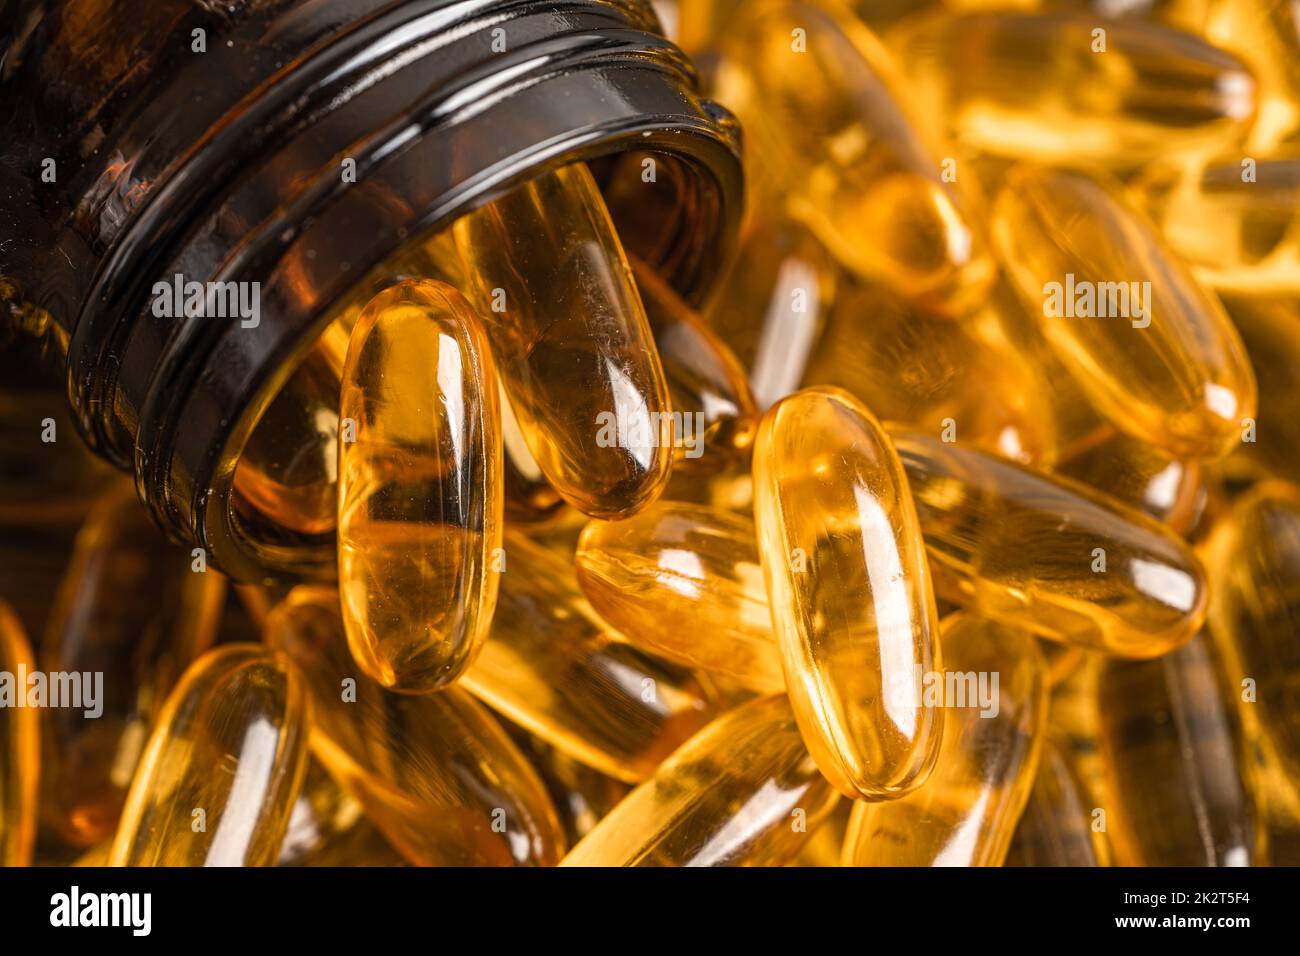 Fish oil Omega 3 capsules vitamin with EPA and DHA isolated on wooden background. Stock Photo